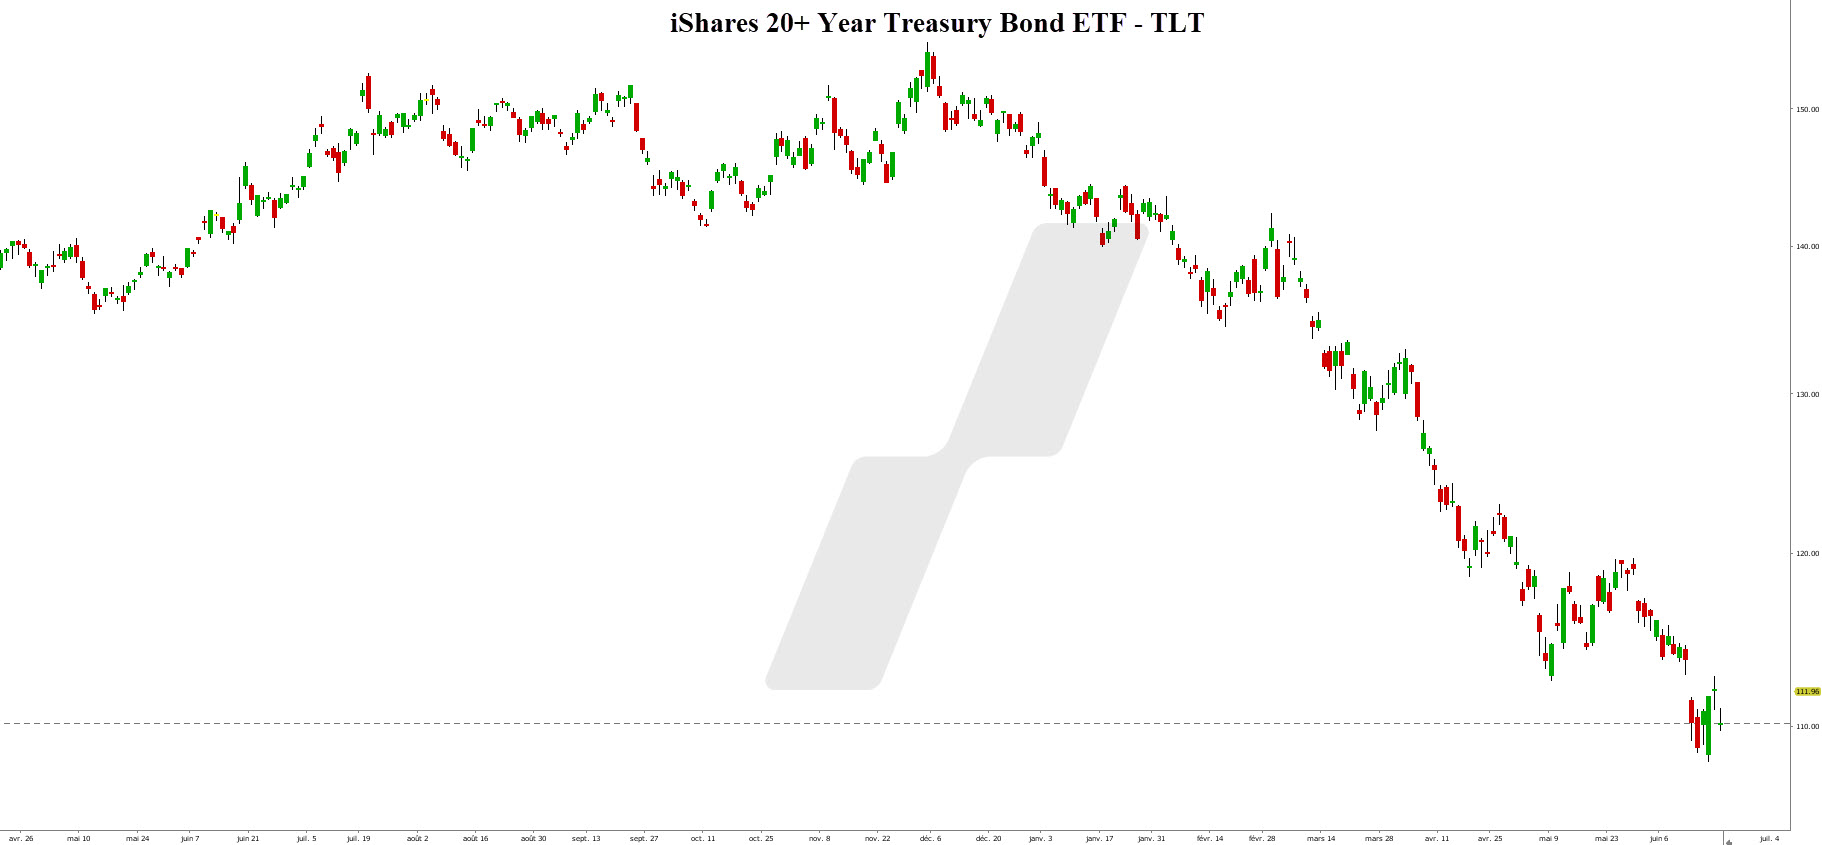 taux 10 ans – 10-year yield - graphique TLT